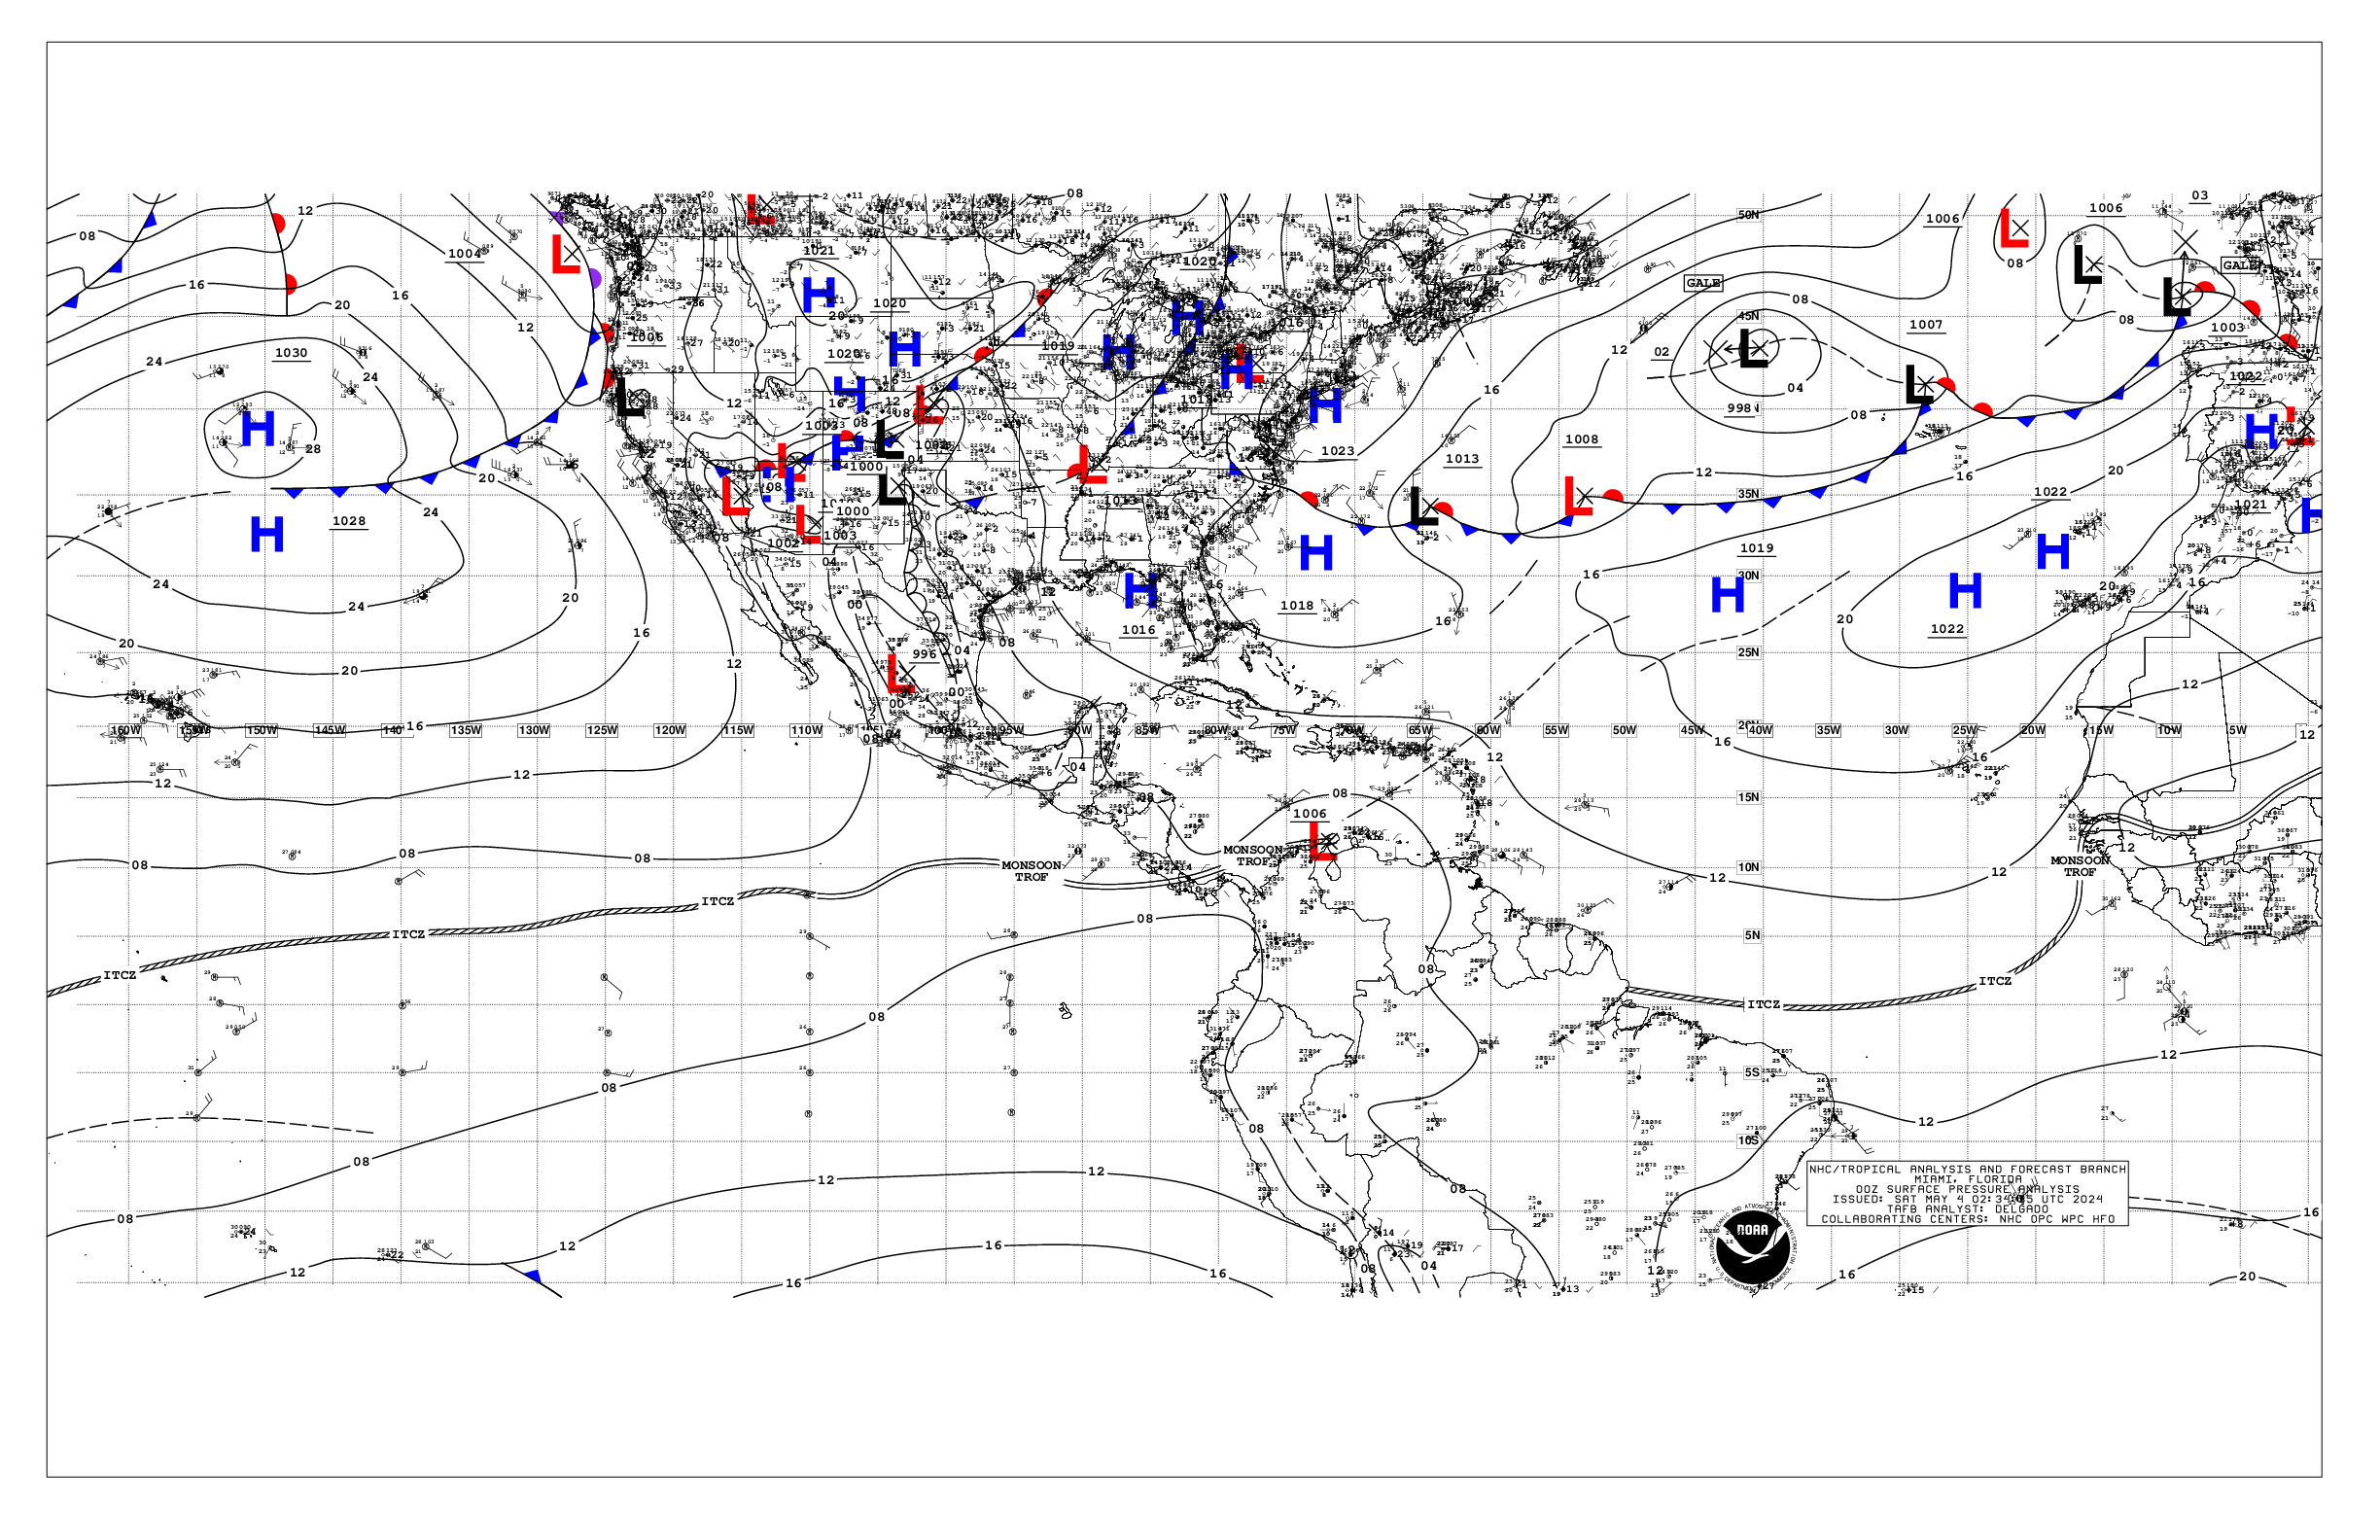 9Z4RG Surface Analysis - Pacific and Atlantic